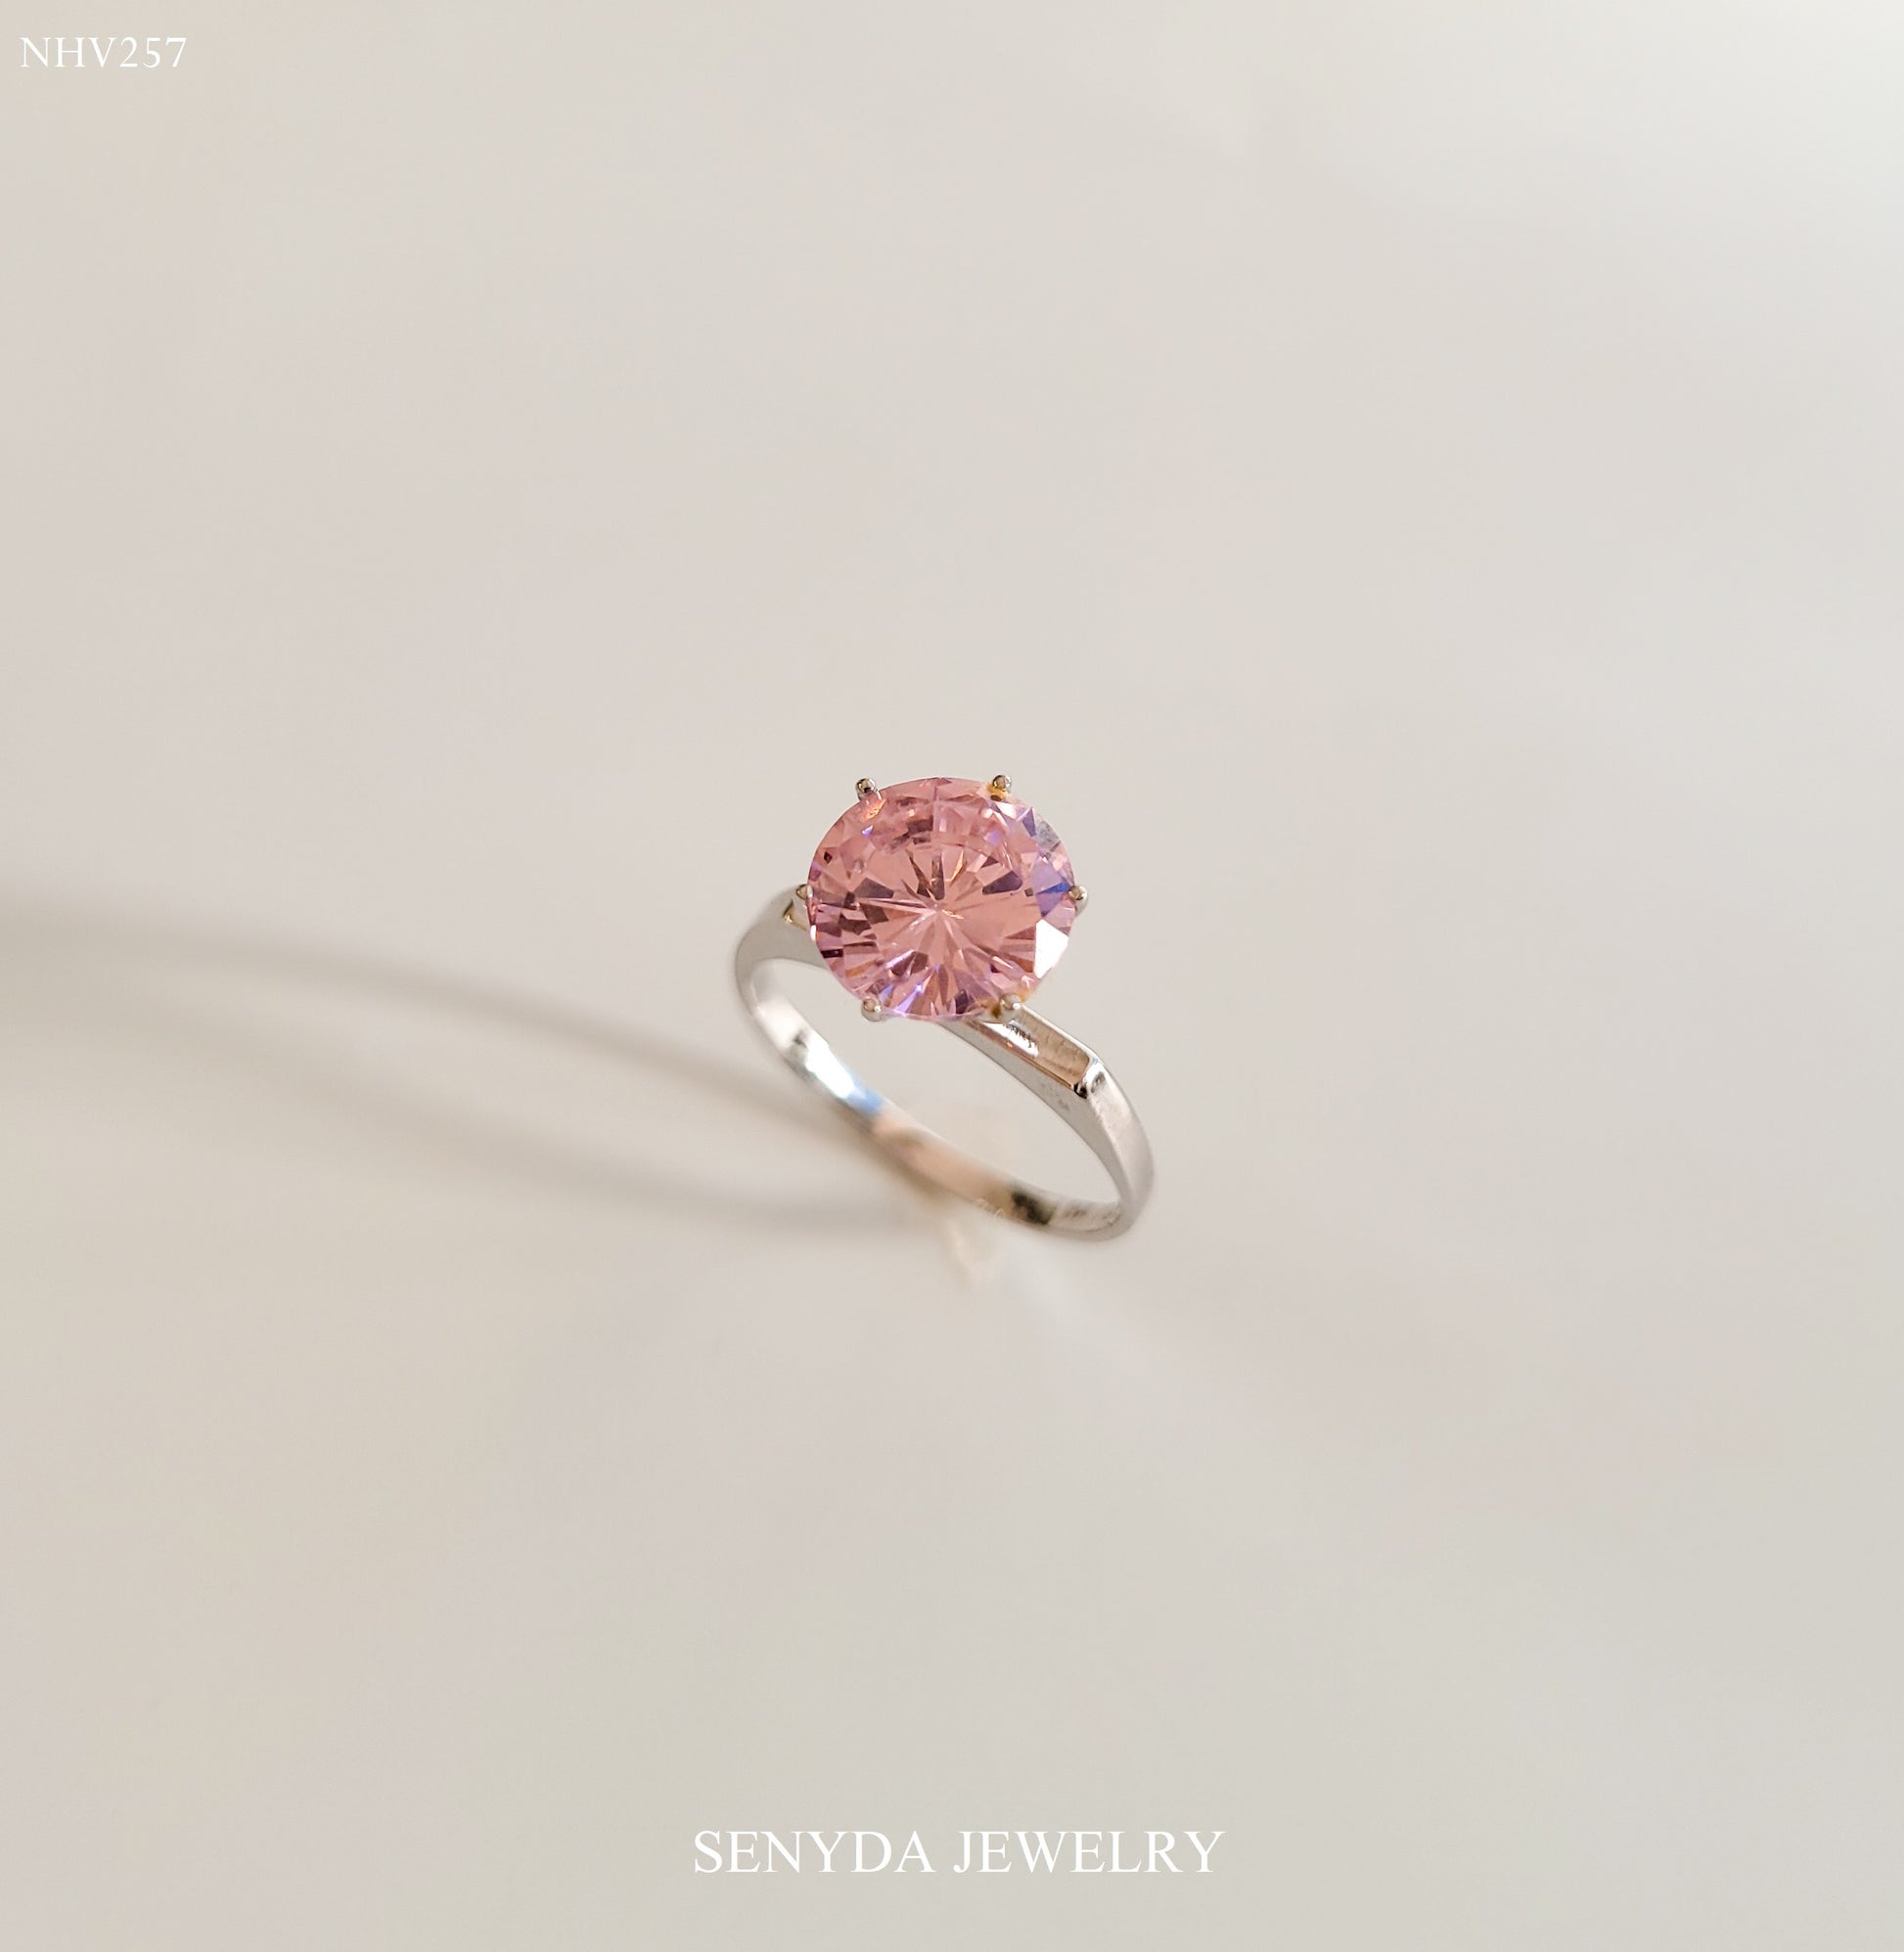 Senyda 10K Solid Gold Special Ring - BLOSSOM's GRACE RING